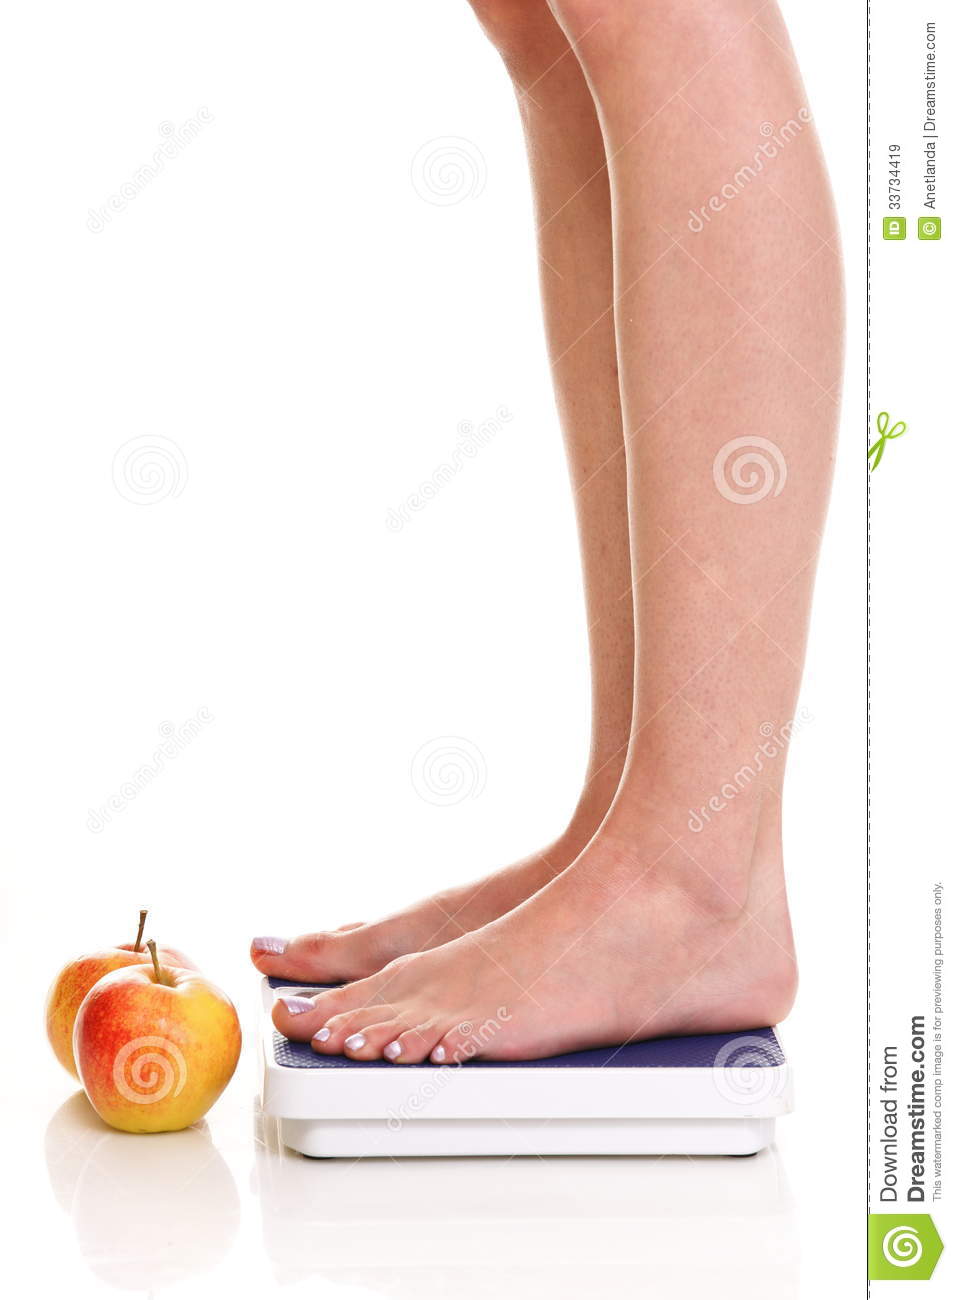 Woman Feet And Weight Scale Isolated On White Background Royalty Free    